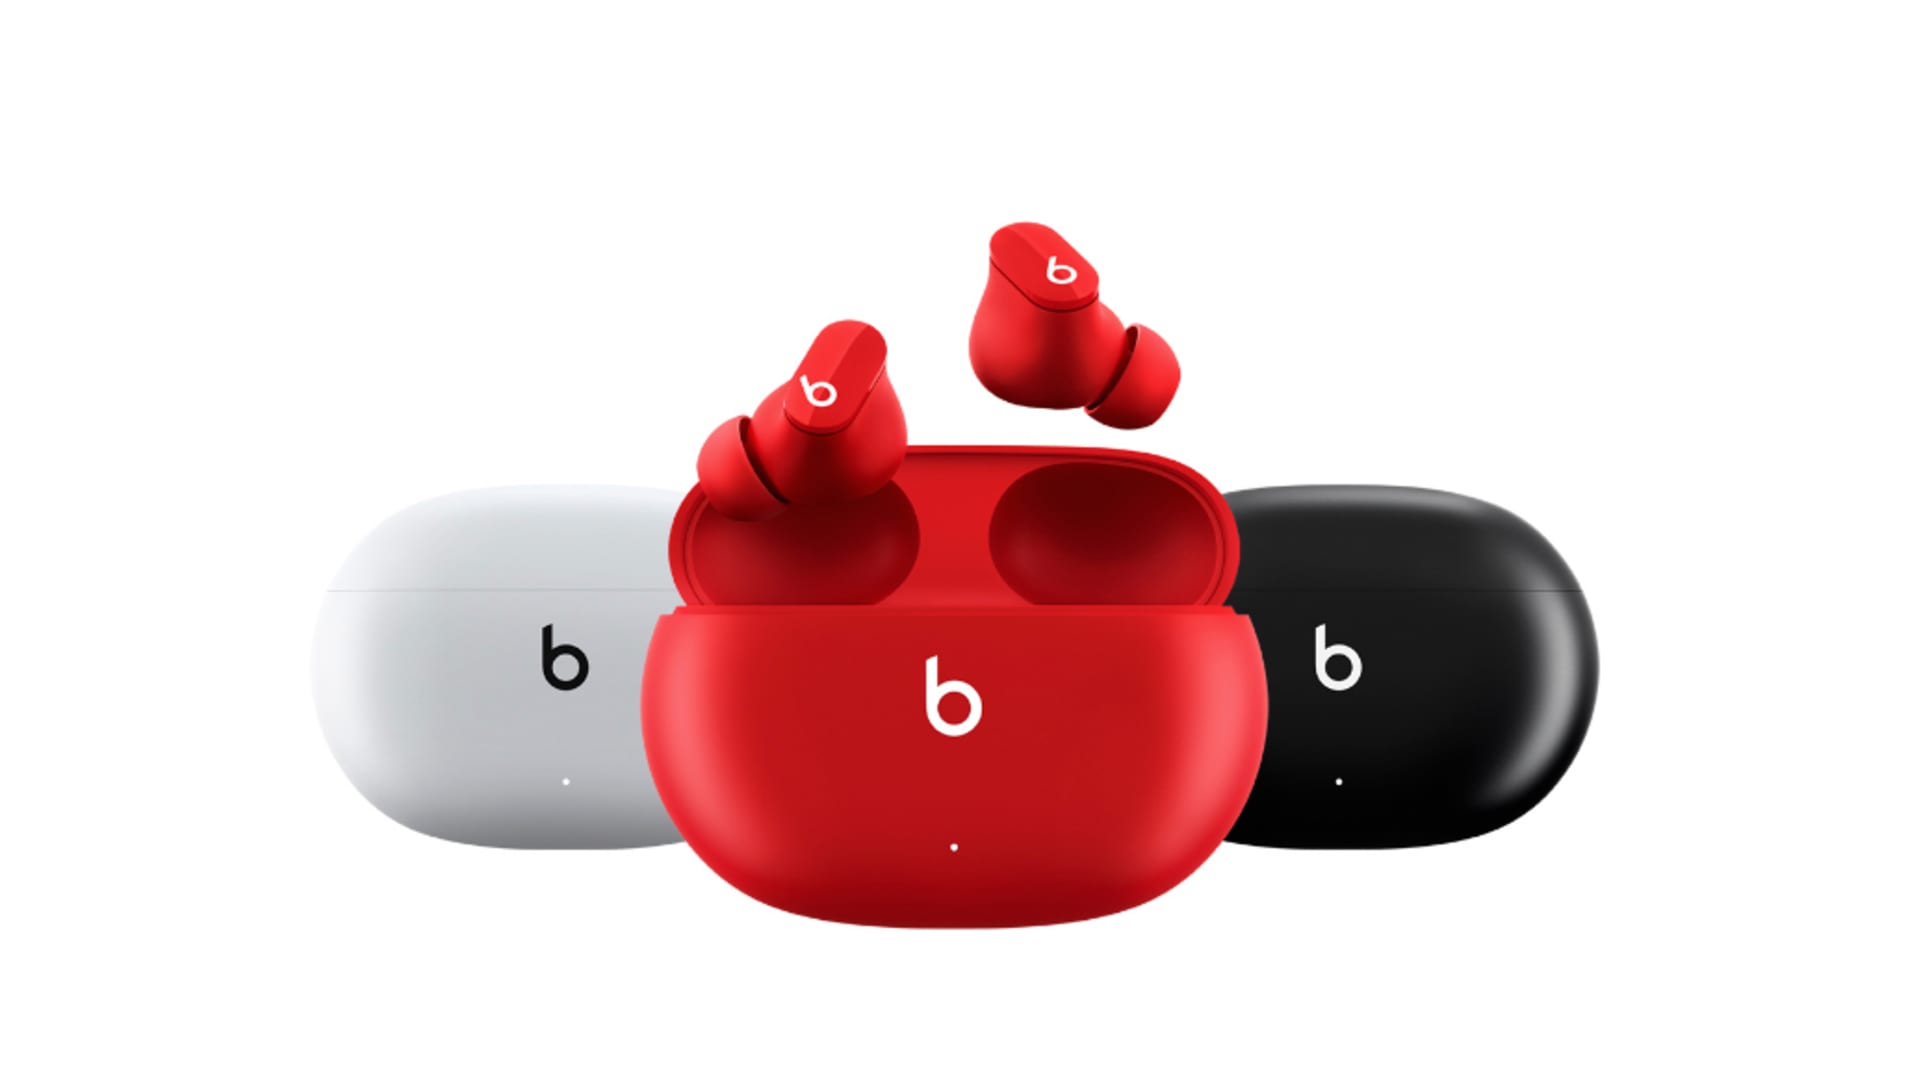 Beats Studio Buds review: More comfortable than AirPods but lack H1